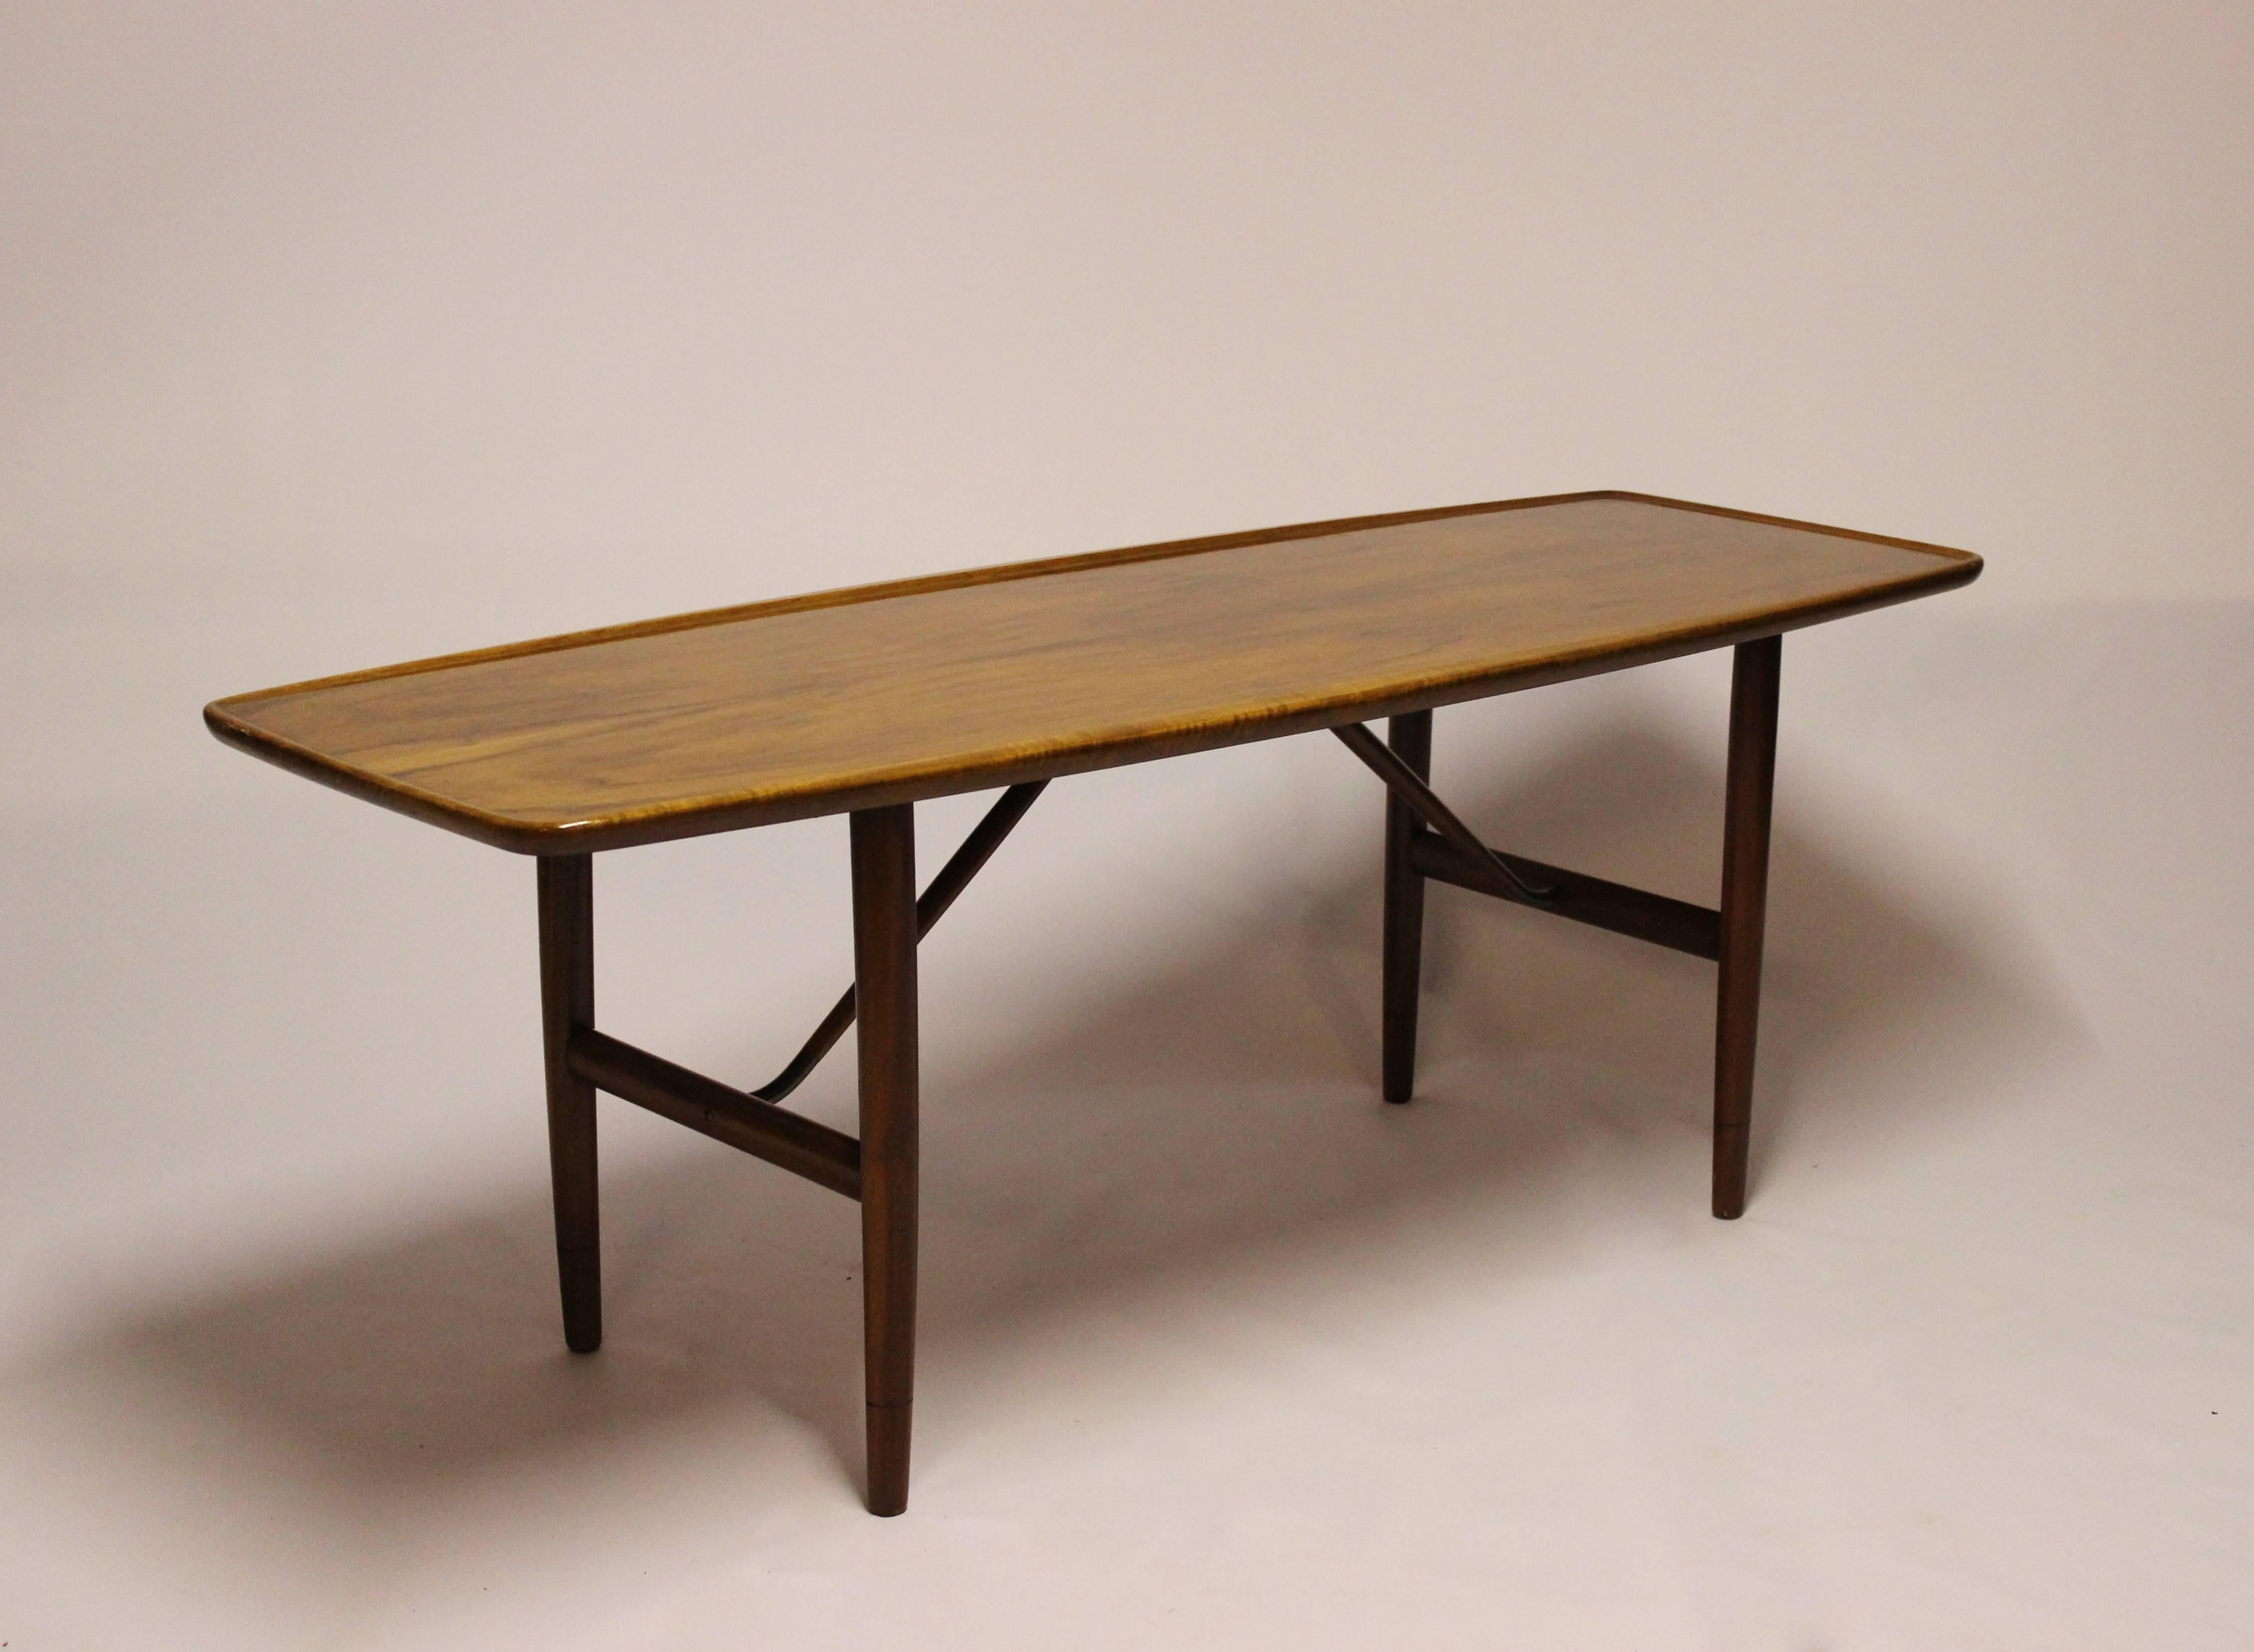 Coffee table in walnut designed by Finn Juhl and manufactured in the 1960s. The table is in great vintage condition.